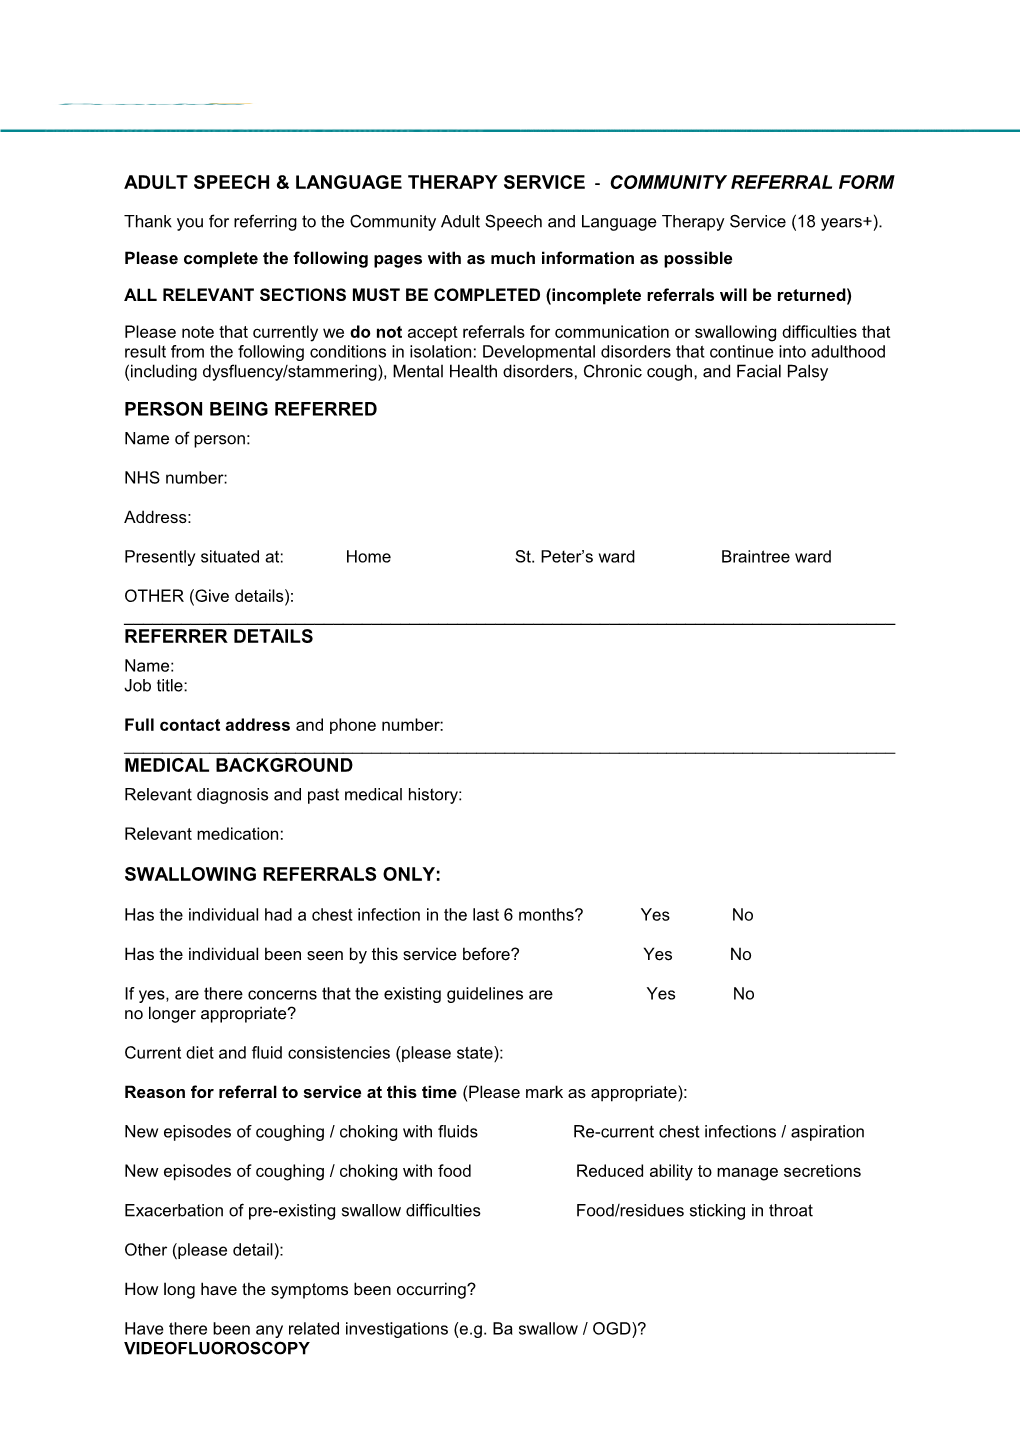 Adult Speech & Language Therapyservice - Community Referral Form